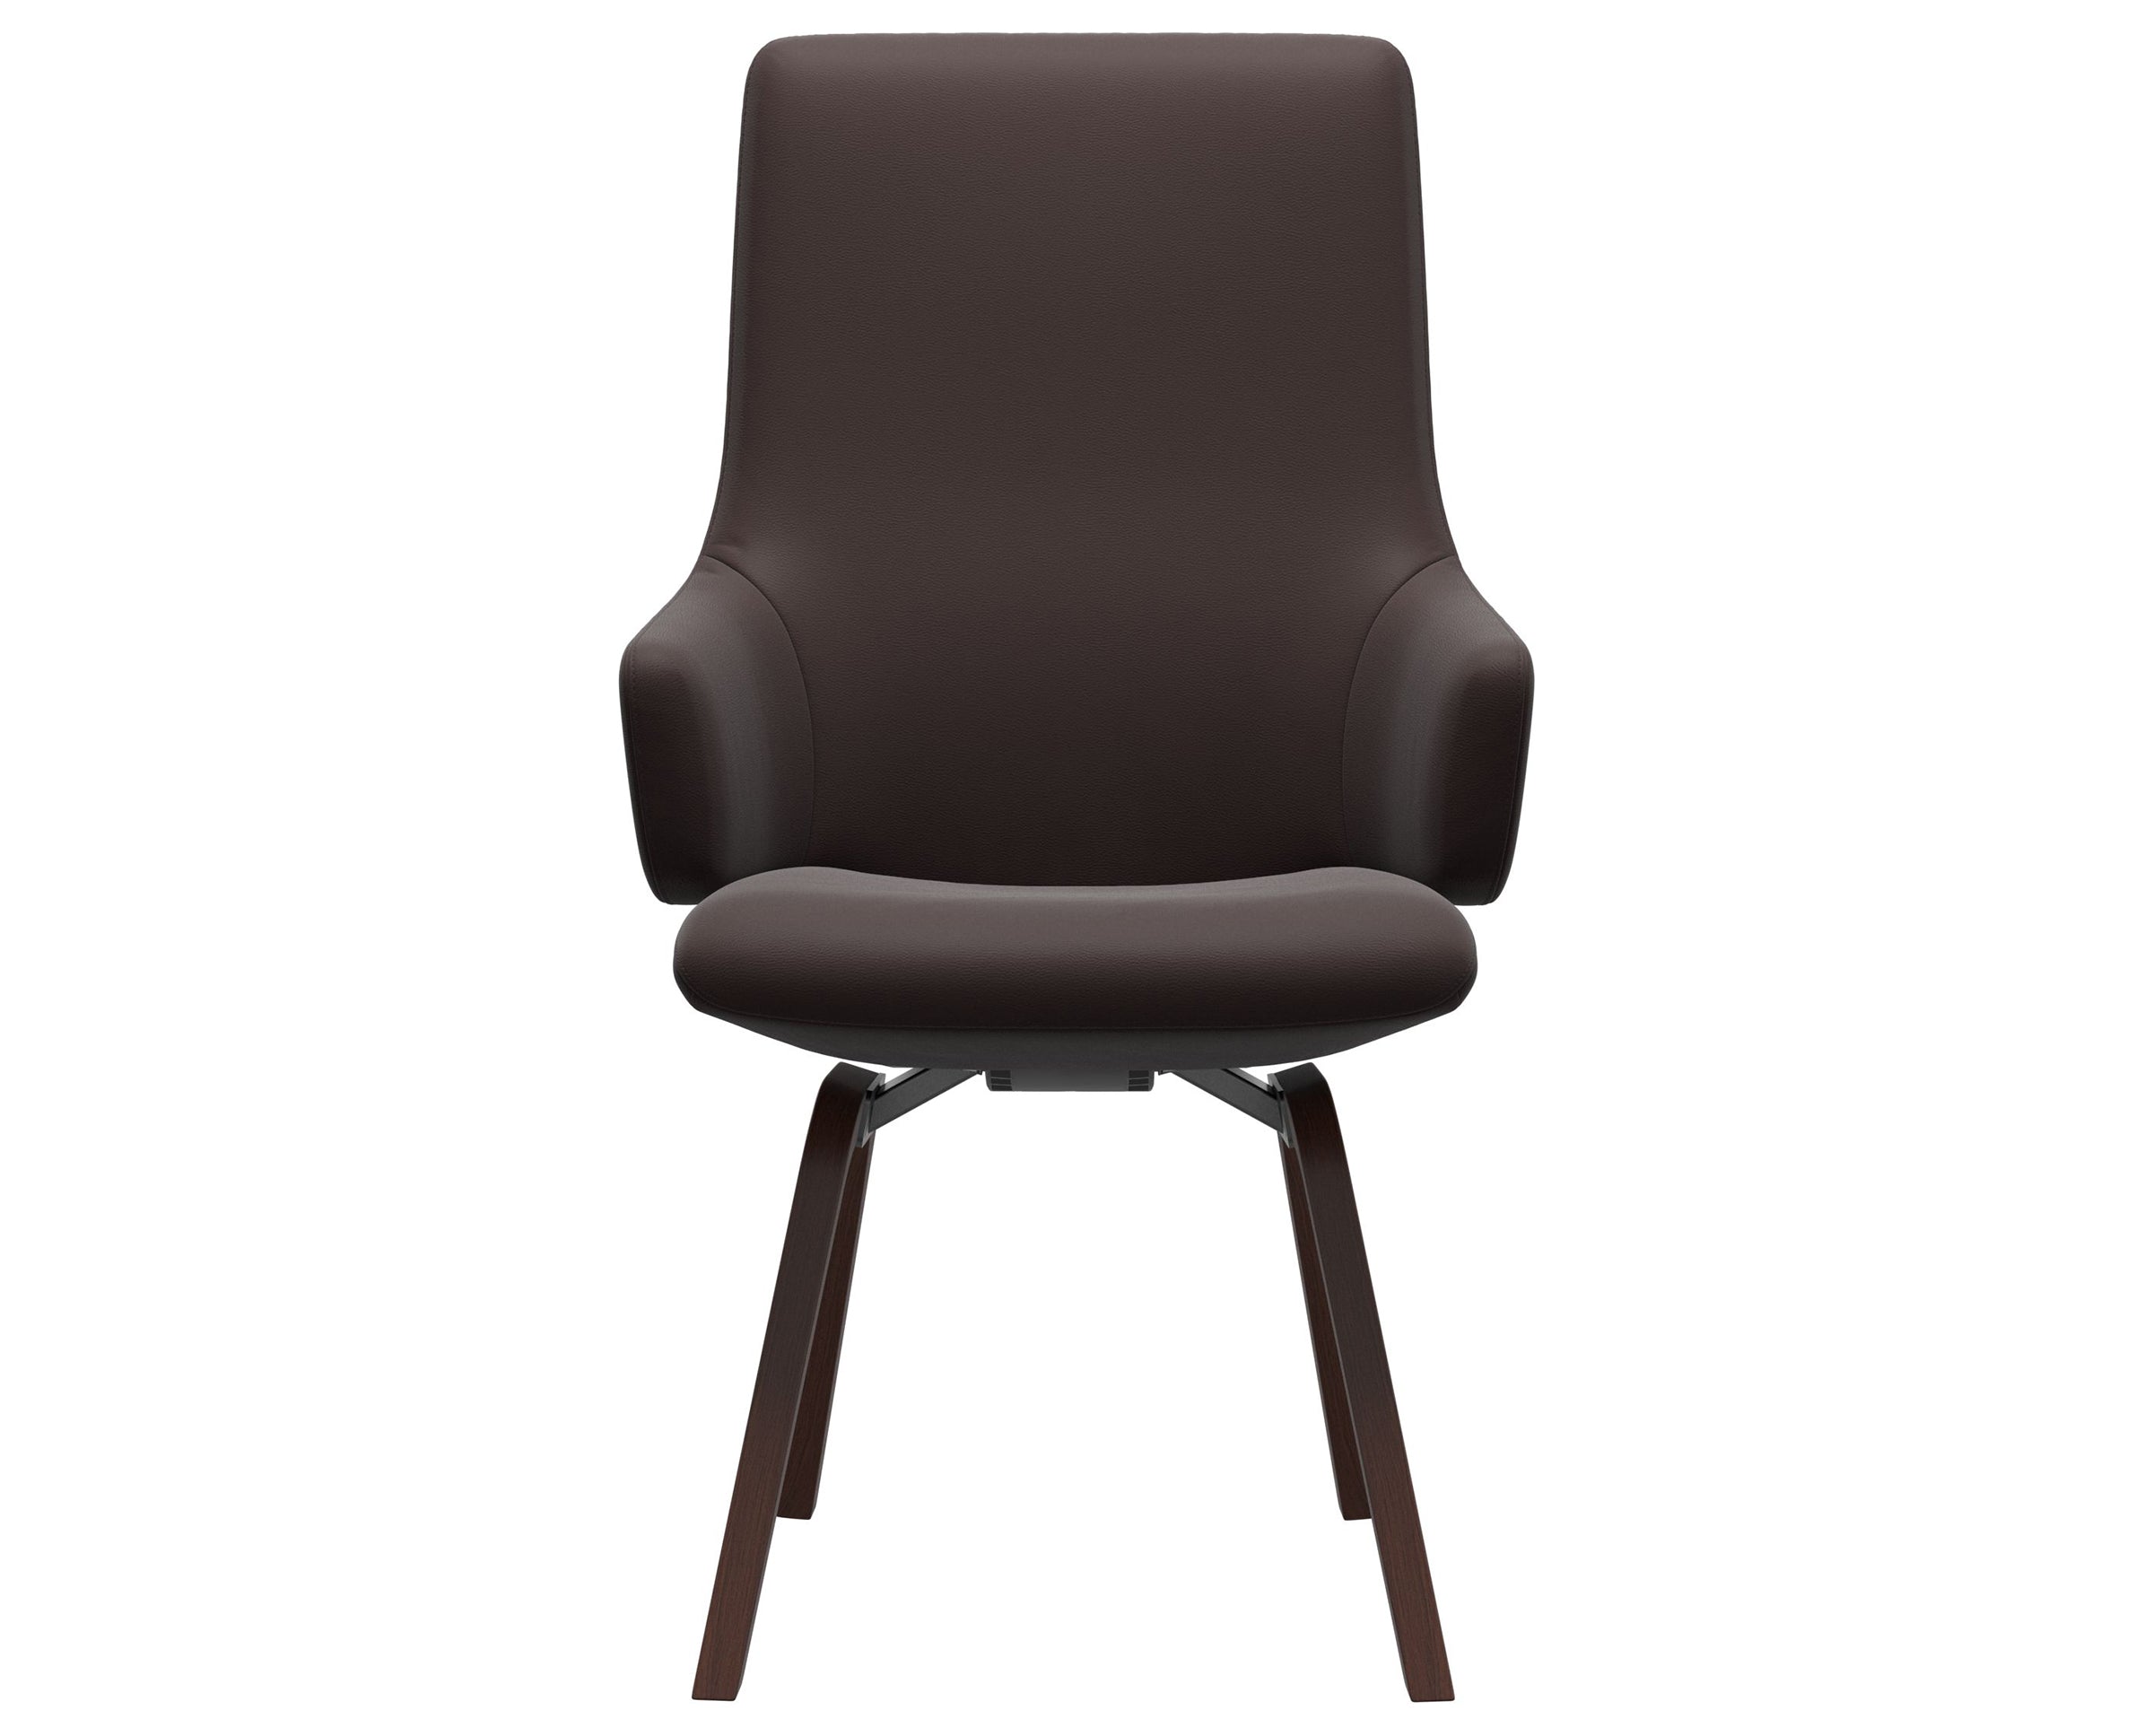 Paloma Leather Chocolate and Walnut Base | Stressless Laurel High Back D200 Dining Chair w/Arms | Valley Ridge Furniture